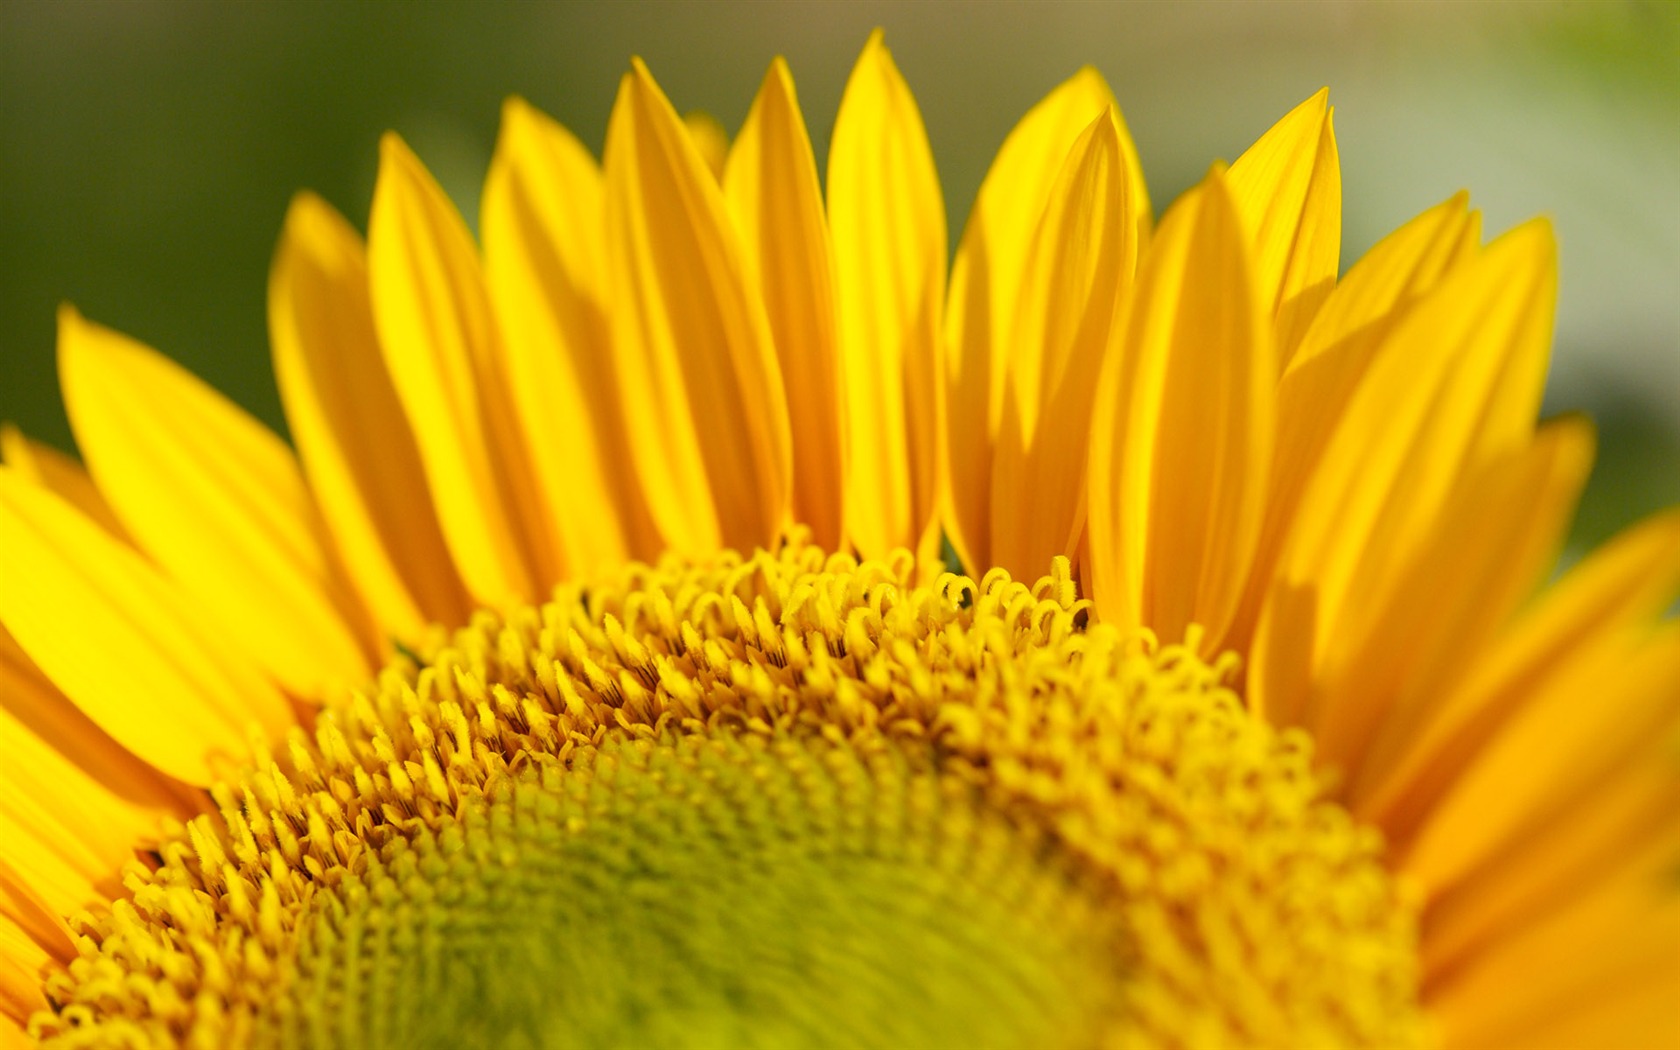 Sunny sunflower photo HD Wallpapers #29 - 1680x1050